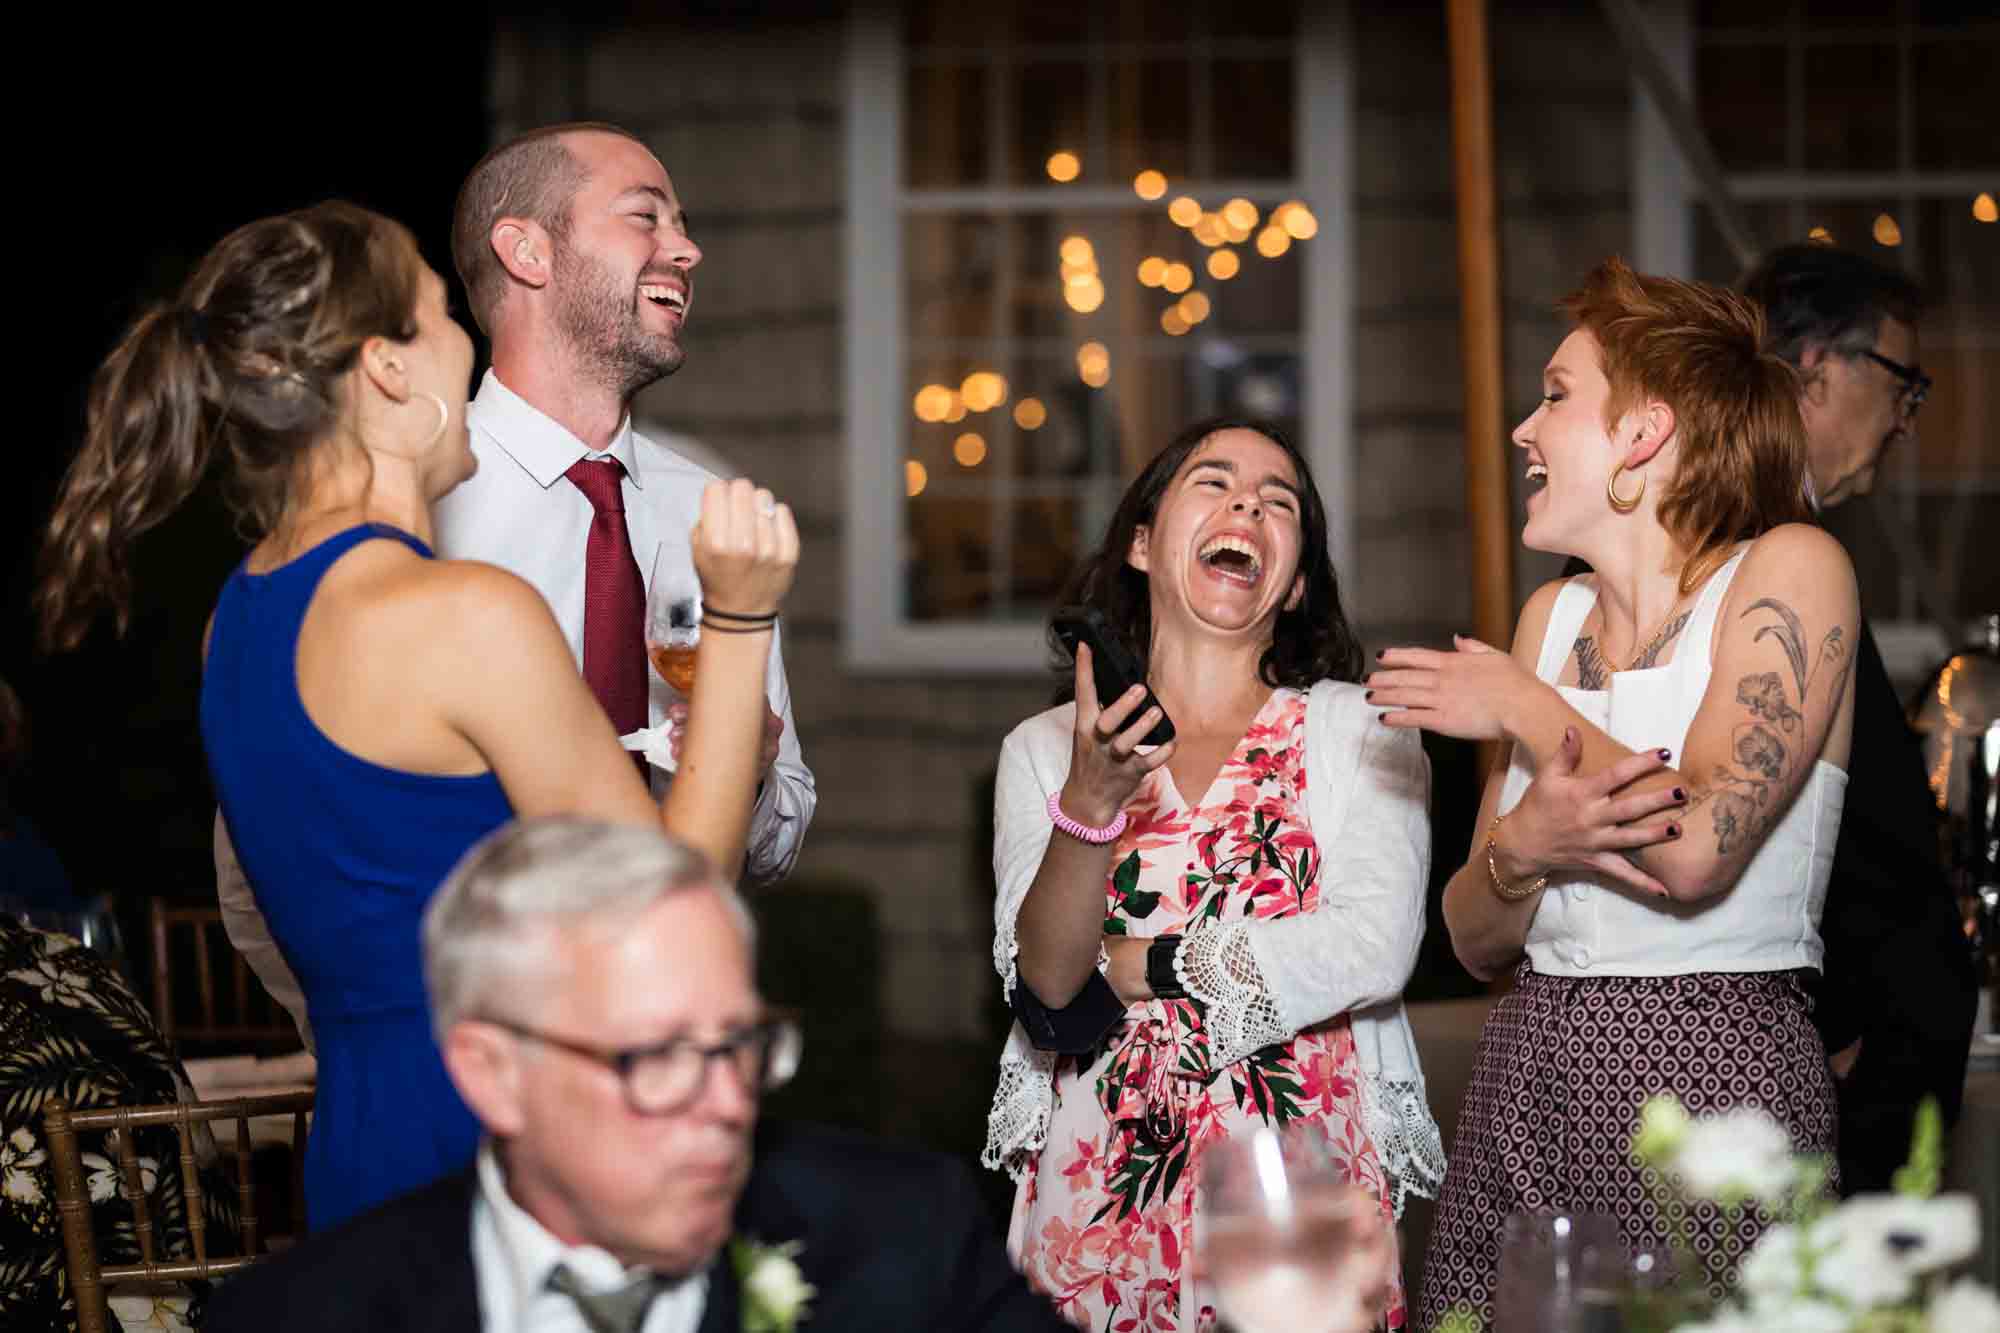 Guests laughing wildly for an article on backyard wedding tips